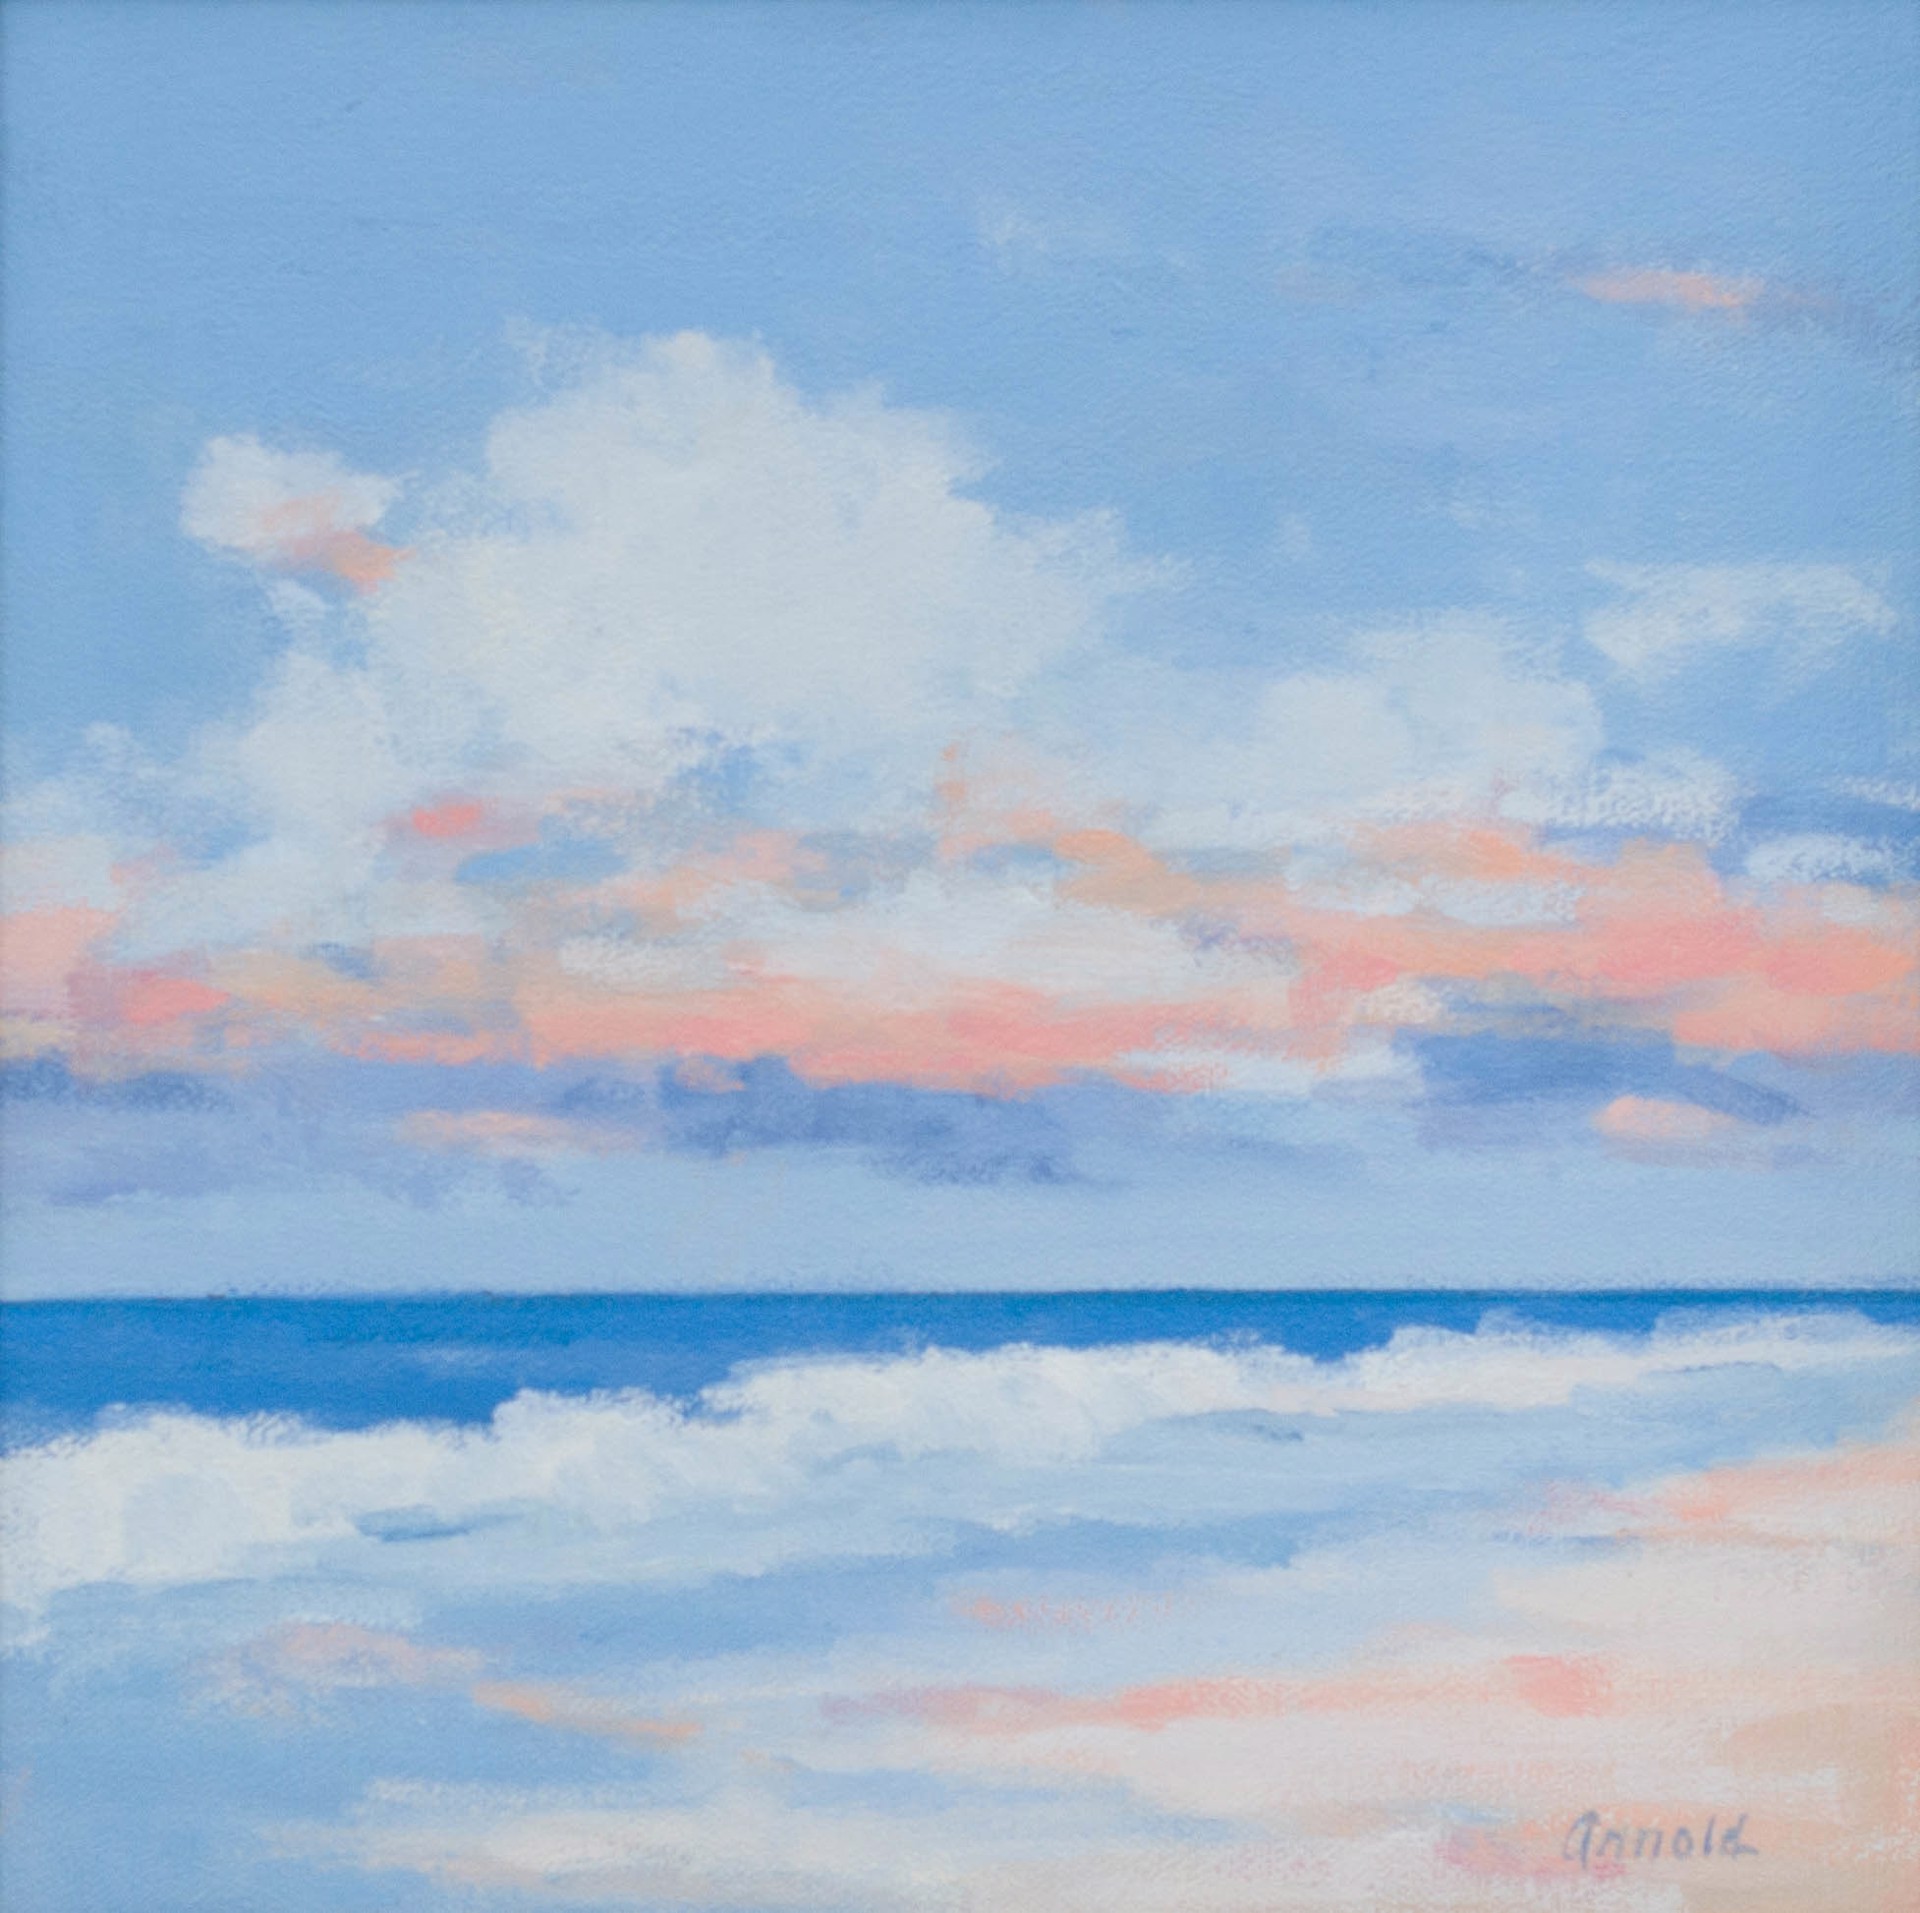 Sea and Sky by Linda Arnold